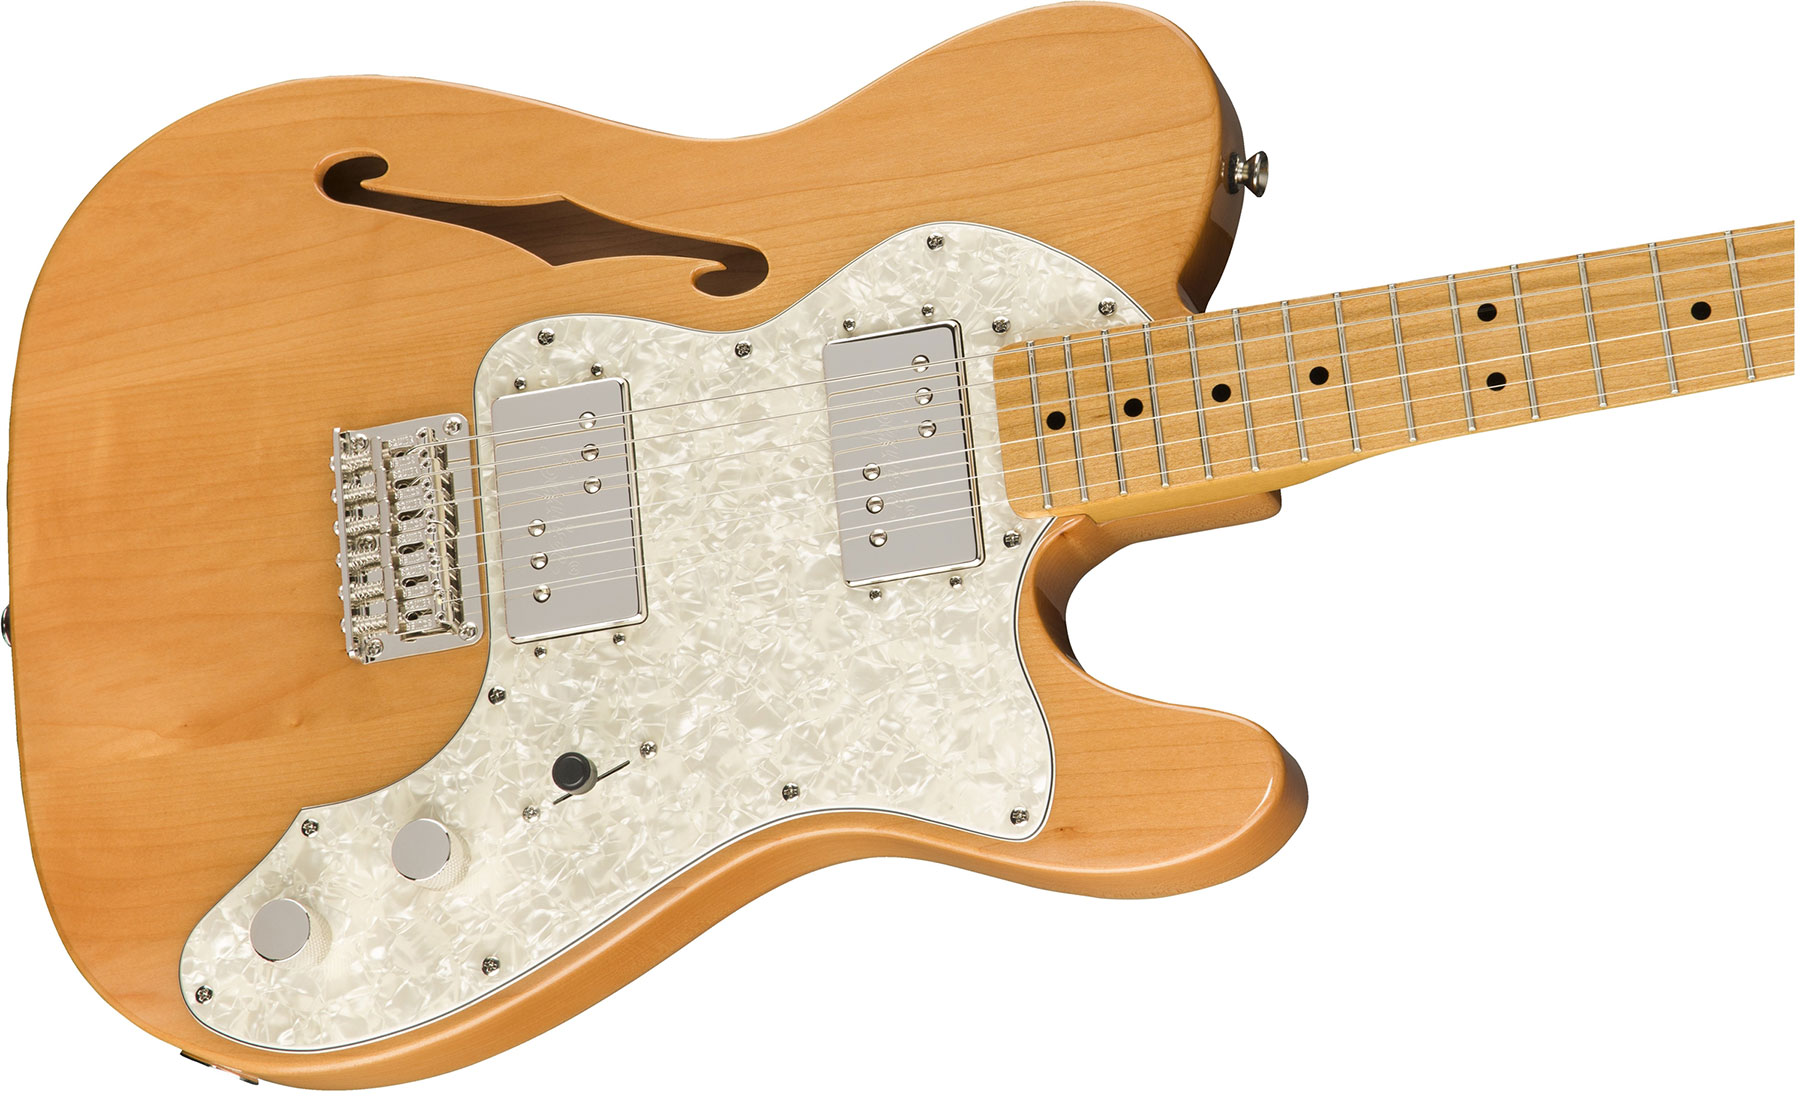 Squier Tele Thinline Classic Vibe 70s 2019 Hh Mn - Natural - Semi-hollow electric guitar - Variation 2